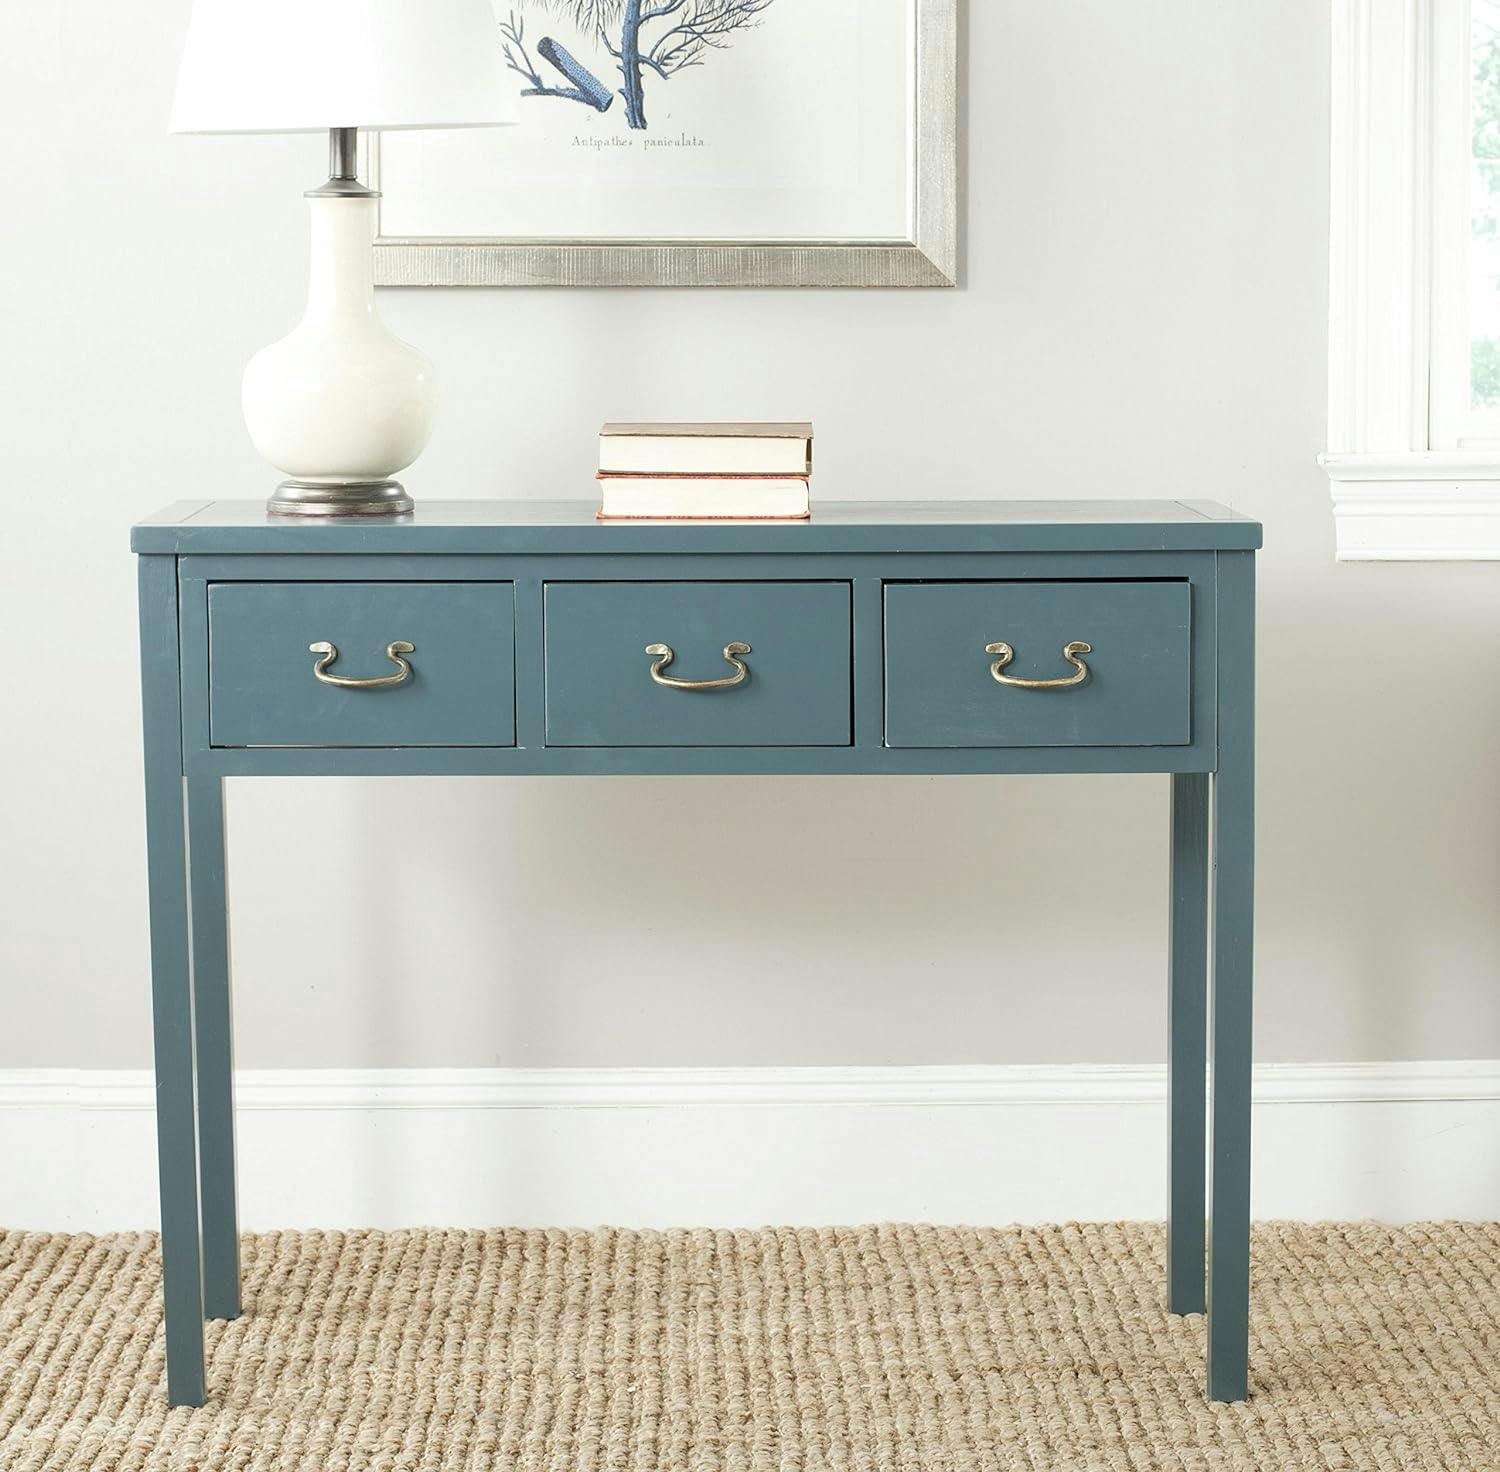 Transitional Slate Teal 3-Drawer Rectangular Console Table with Brass Hinges